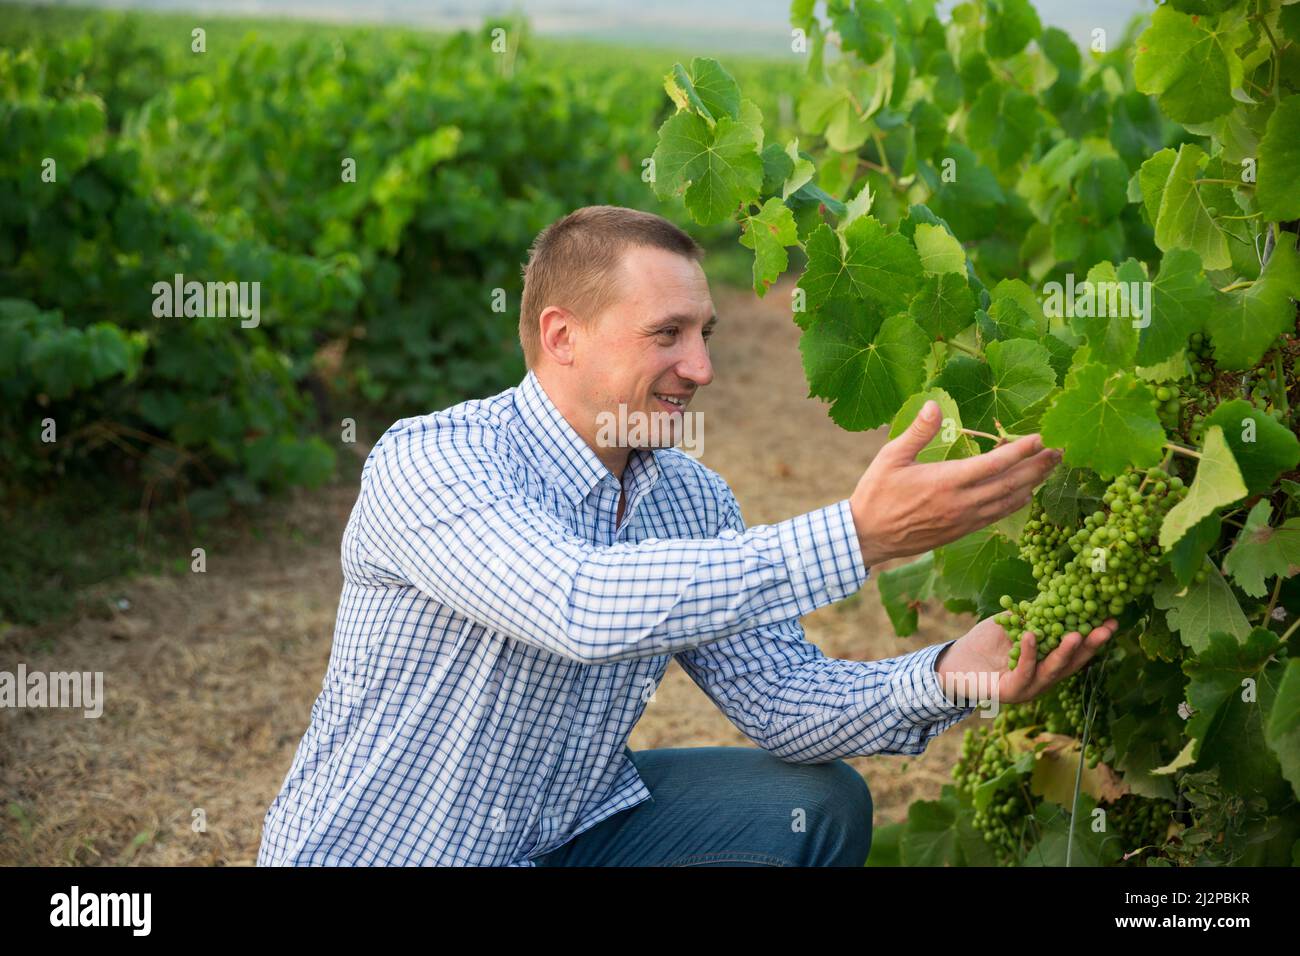 Male winemaker working with grapes in vineyard at fields Stock Photo